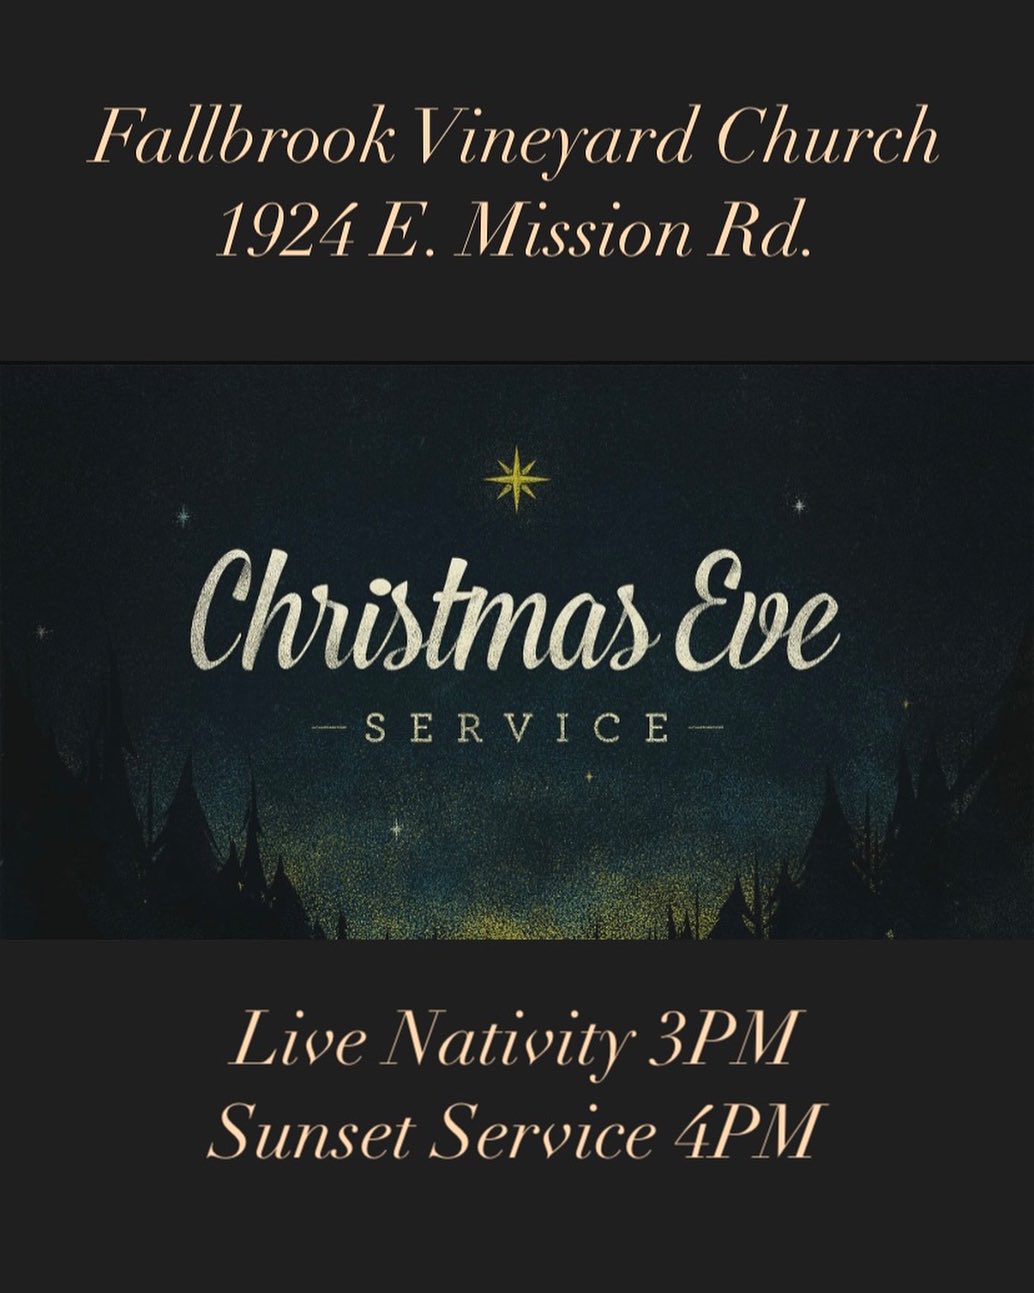 Invite Someone to Christmas Eve at Fallbrook Vineyard Church! Live Nativity 3PMSunset Service 4PM1924 E. Mission RdA unique and memorable evening celebrating the birth of Christ the Lord Weather details to follow but for now, we plan on being outside, so bring your chairs 🤍We can’t wait to celebrate with you! #ocomeletusadorehim#john316#outdoorchristmaseveservice#livenativity